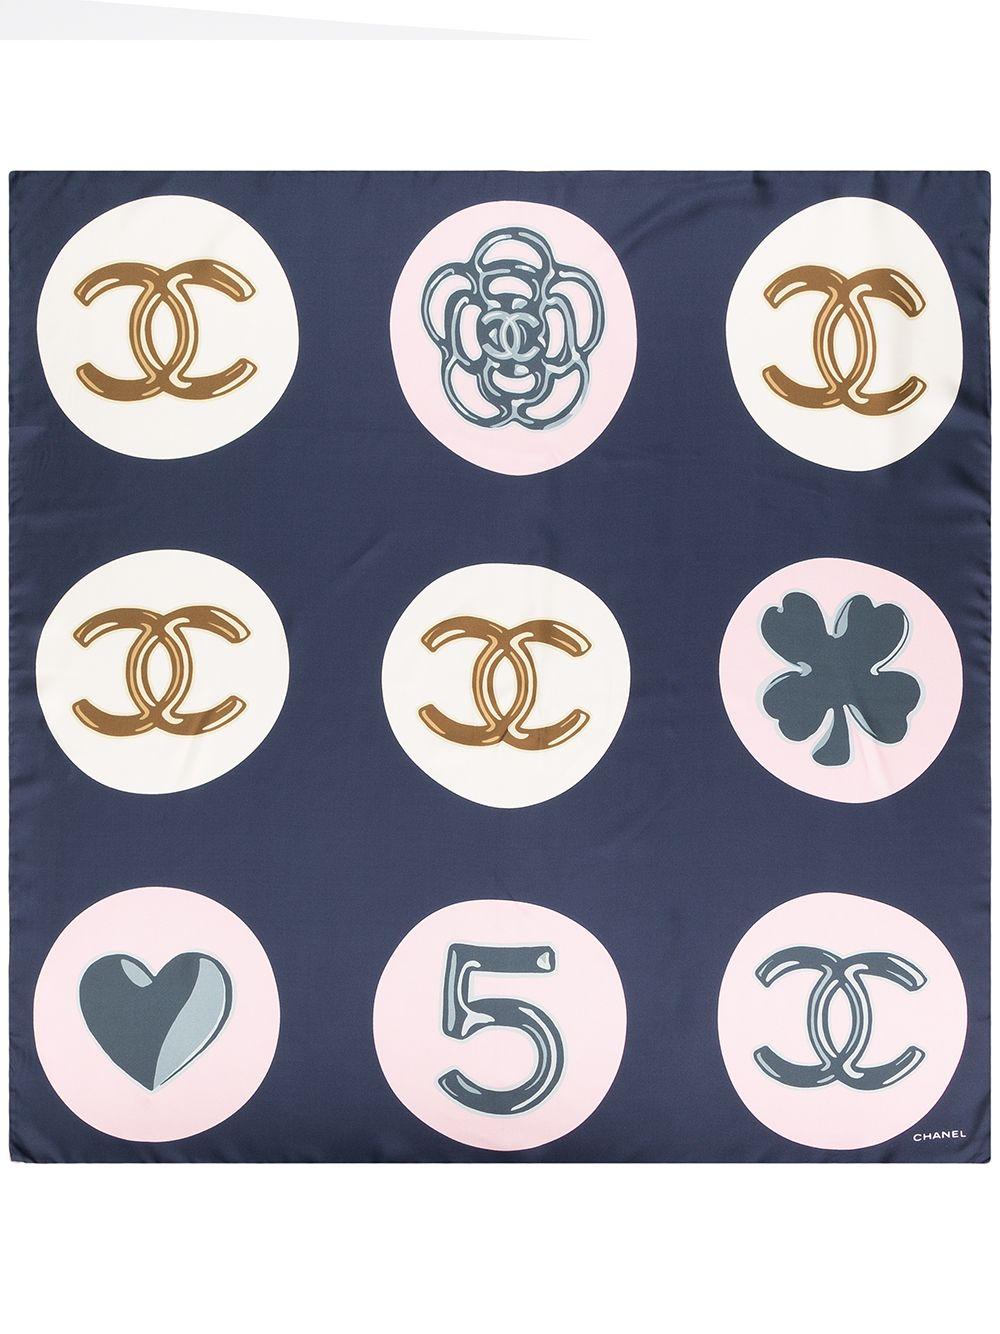 Camellia flowers, four-leaf clovers and the iconic interlocking CC logo make up this gorgeous 100% silk scarf from Chanel. In royal navy and blush pink, this scarf would add the perfect finishing touch to any ensemble or can be loosely tied on your